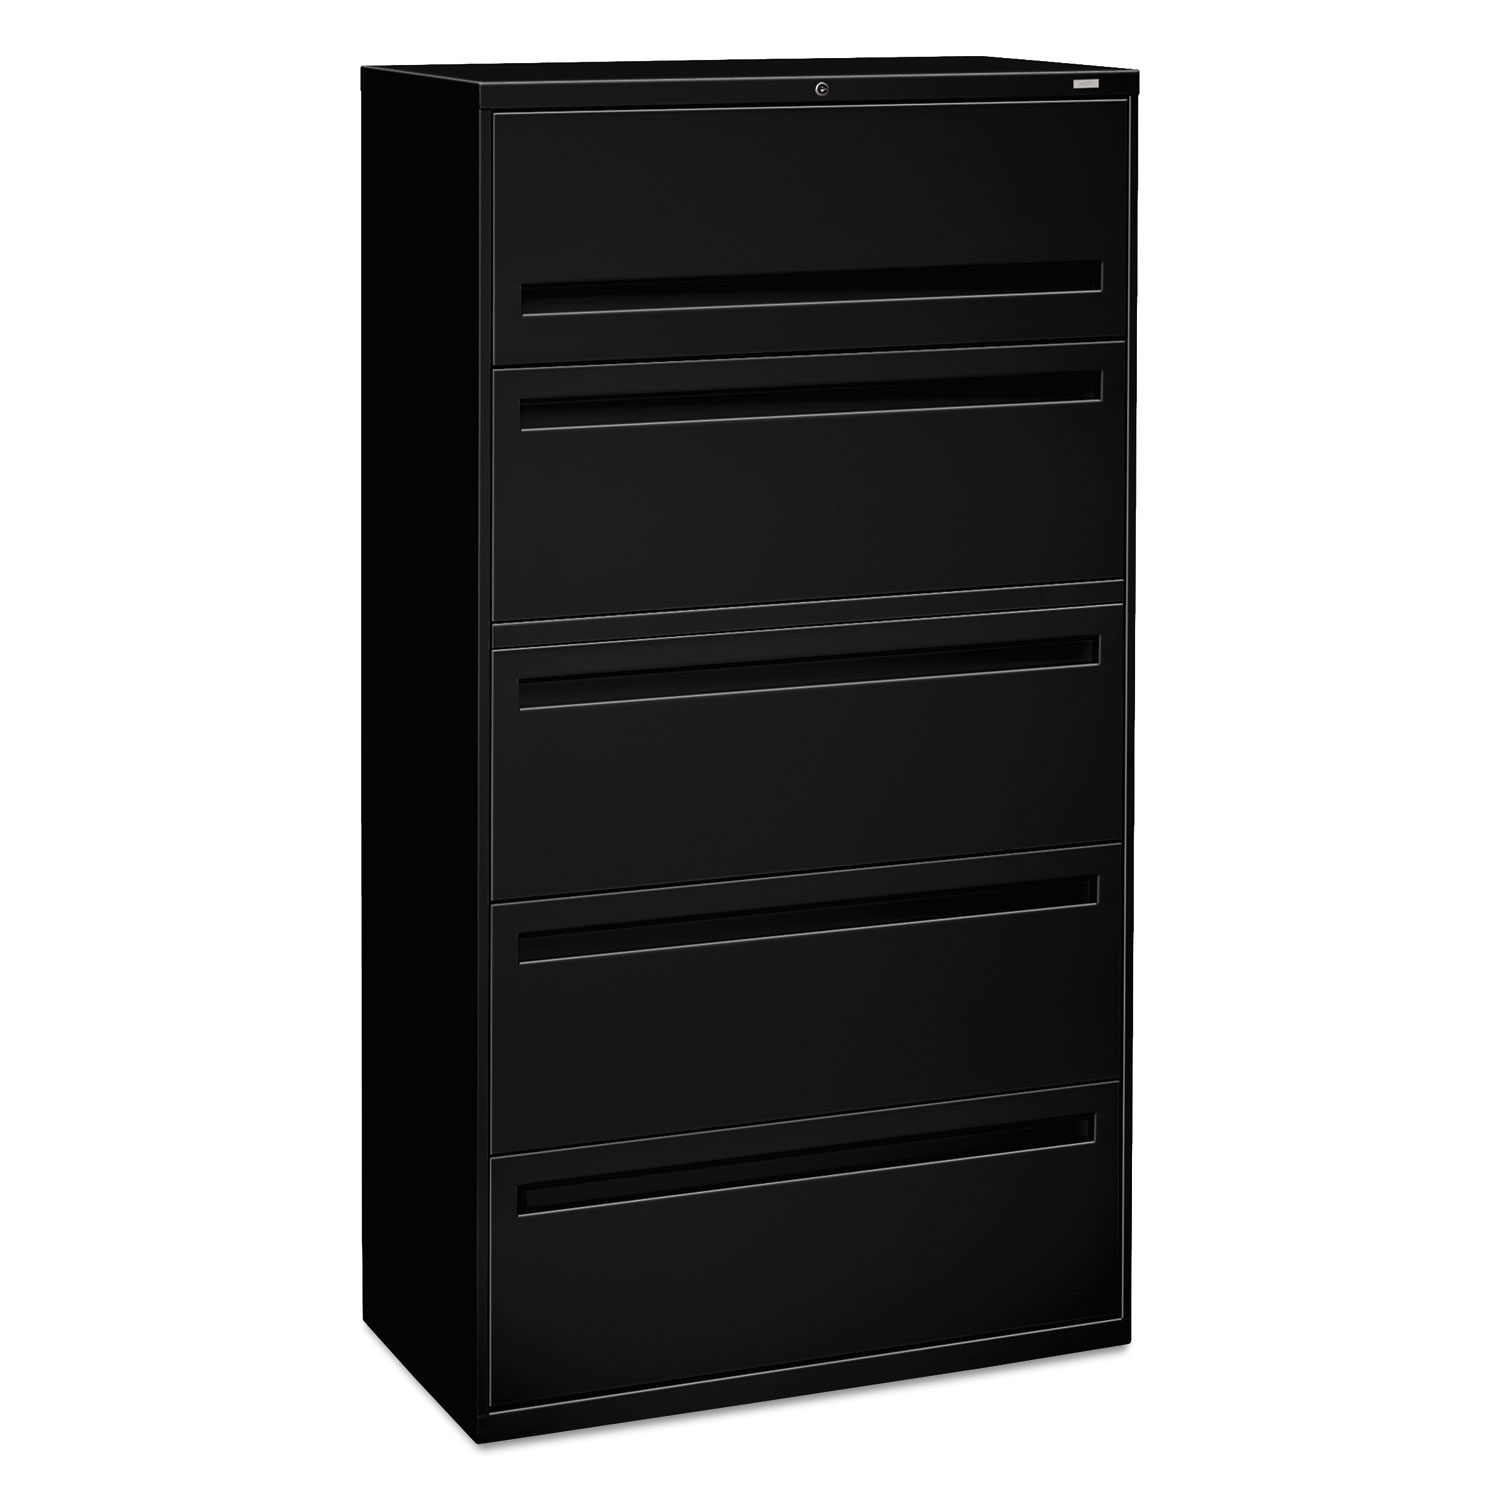  HON H785.L.P 700 Series Five-Drawer Lateral File with Roll-Out Shelf, 36w x 18d x 64.25h, Black (HON785LP) 